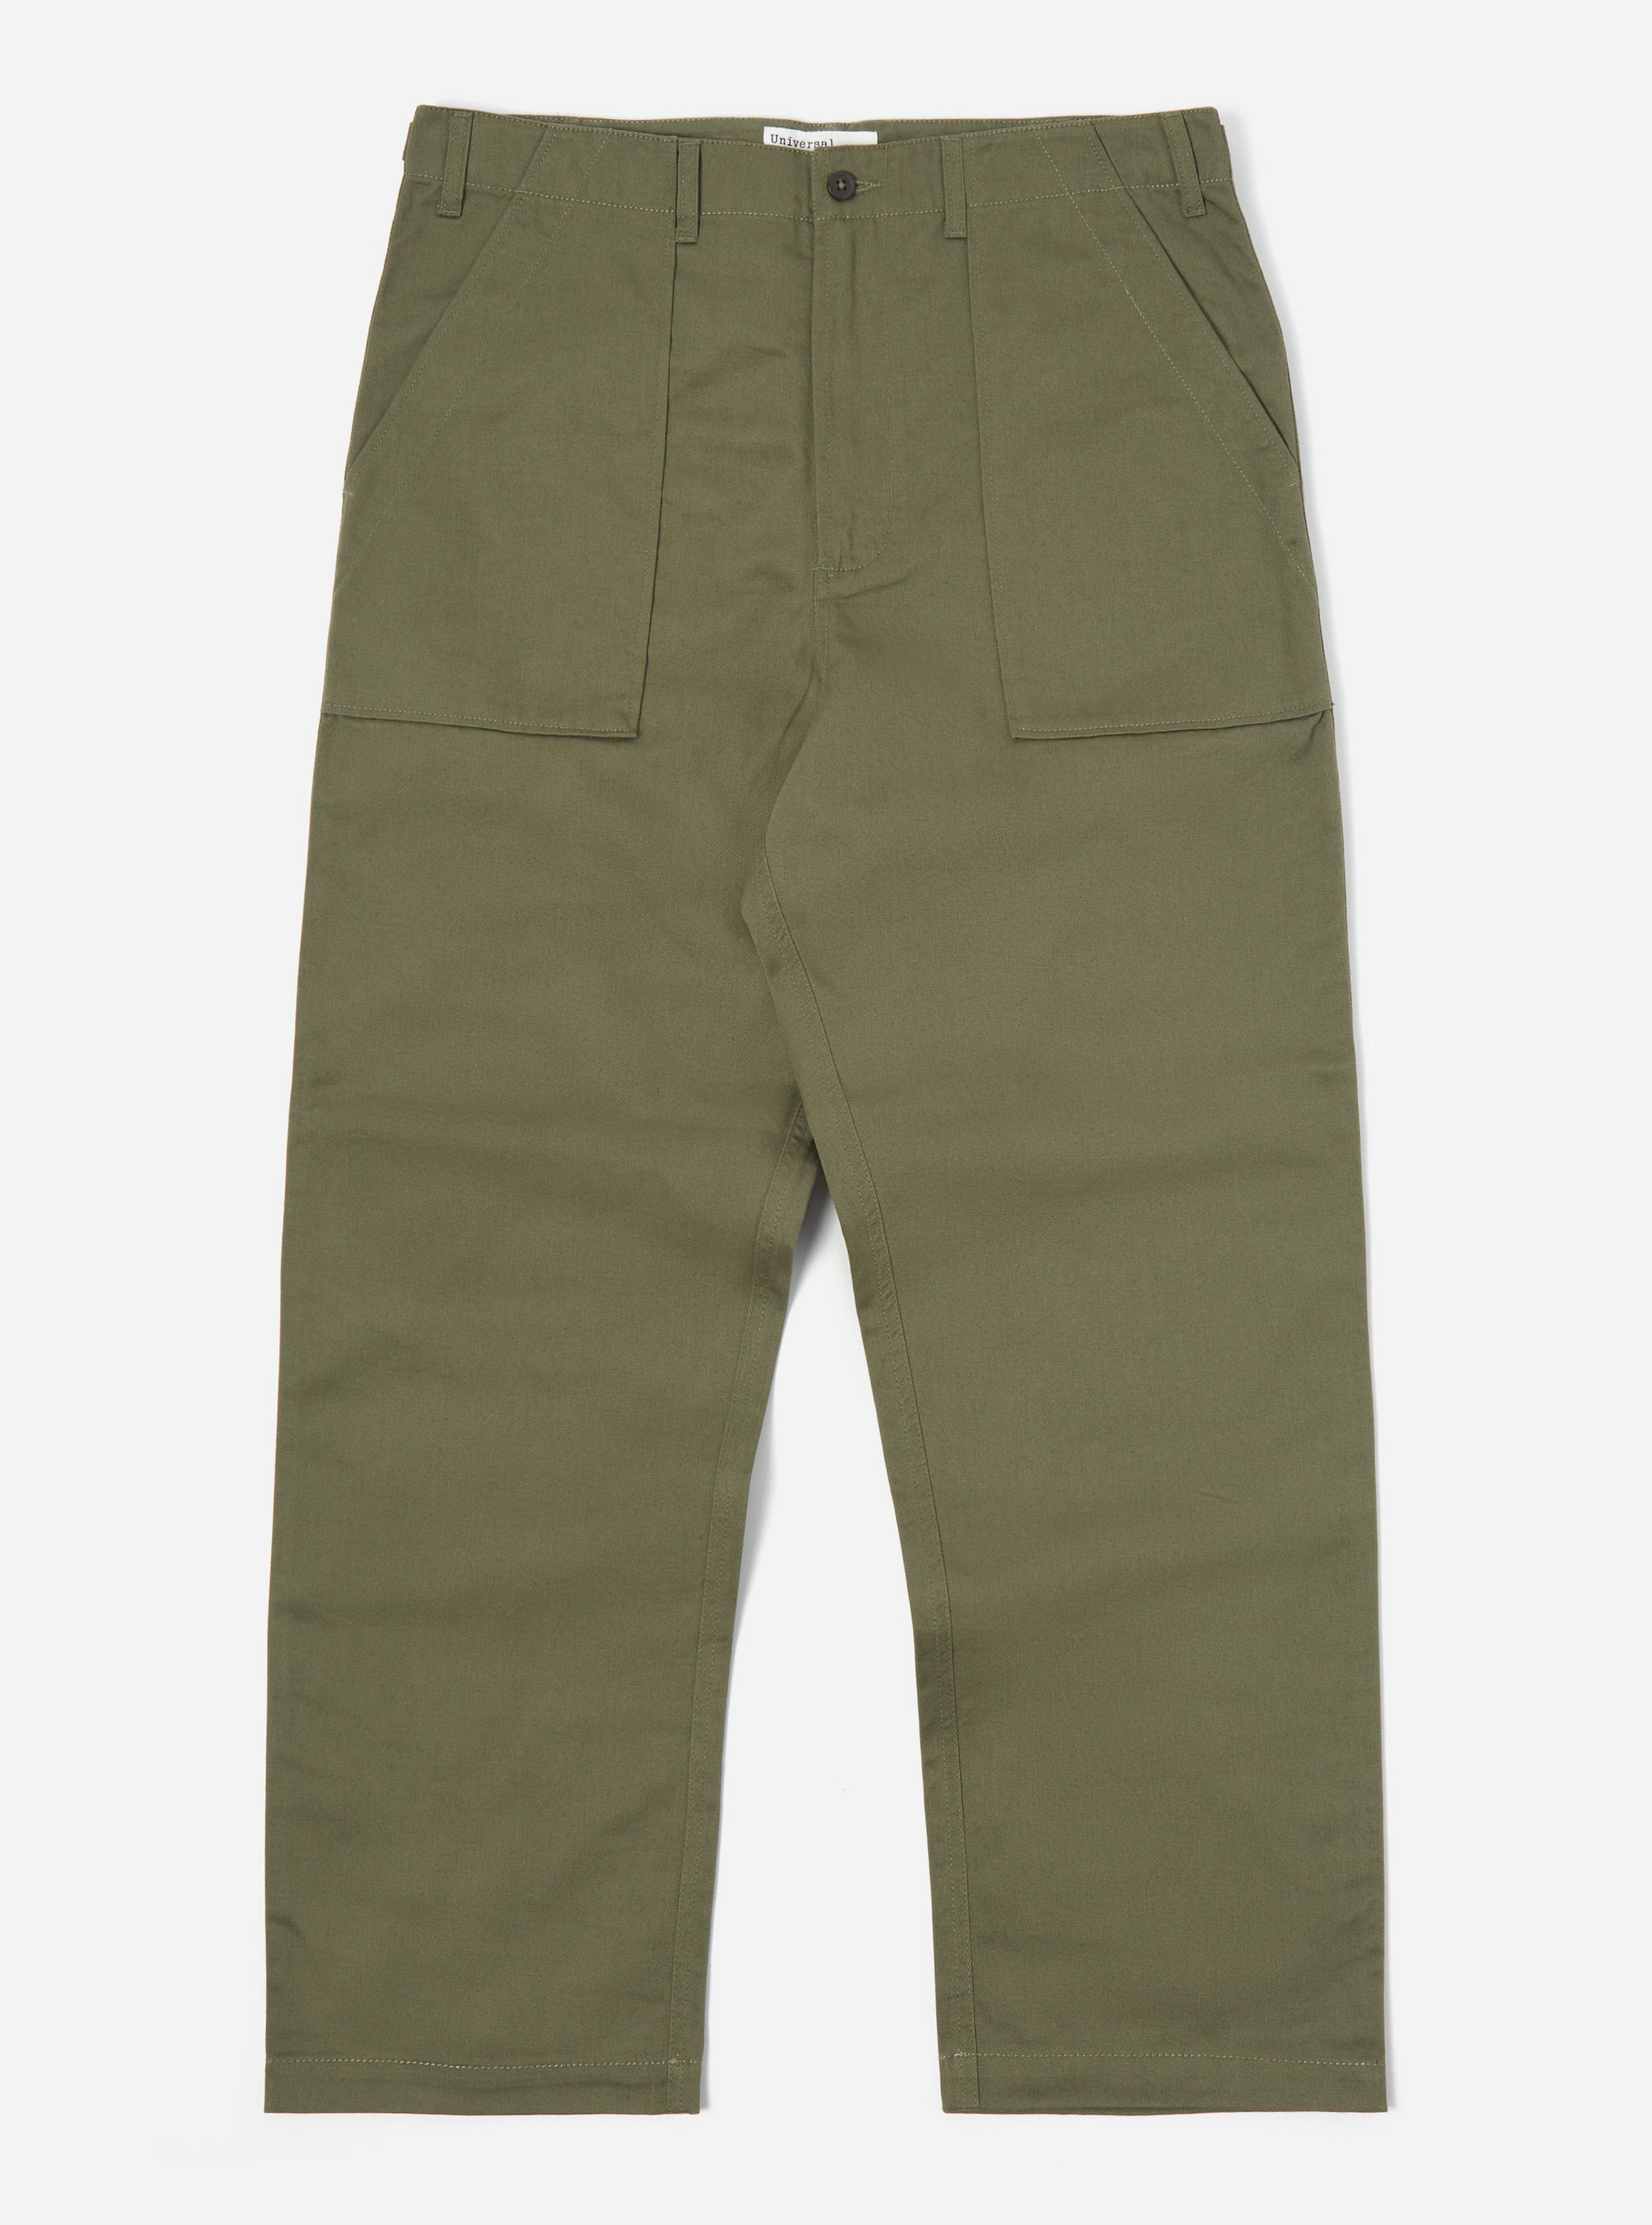 Buy Charcoal Cargo Trousers 38L | Trousers | Tu